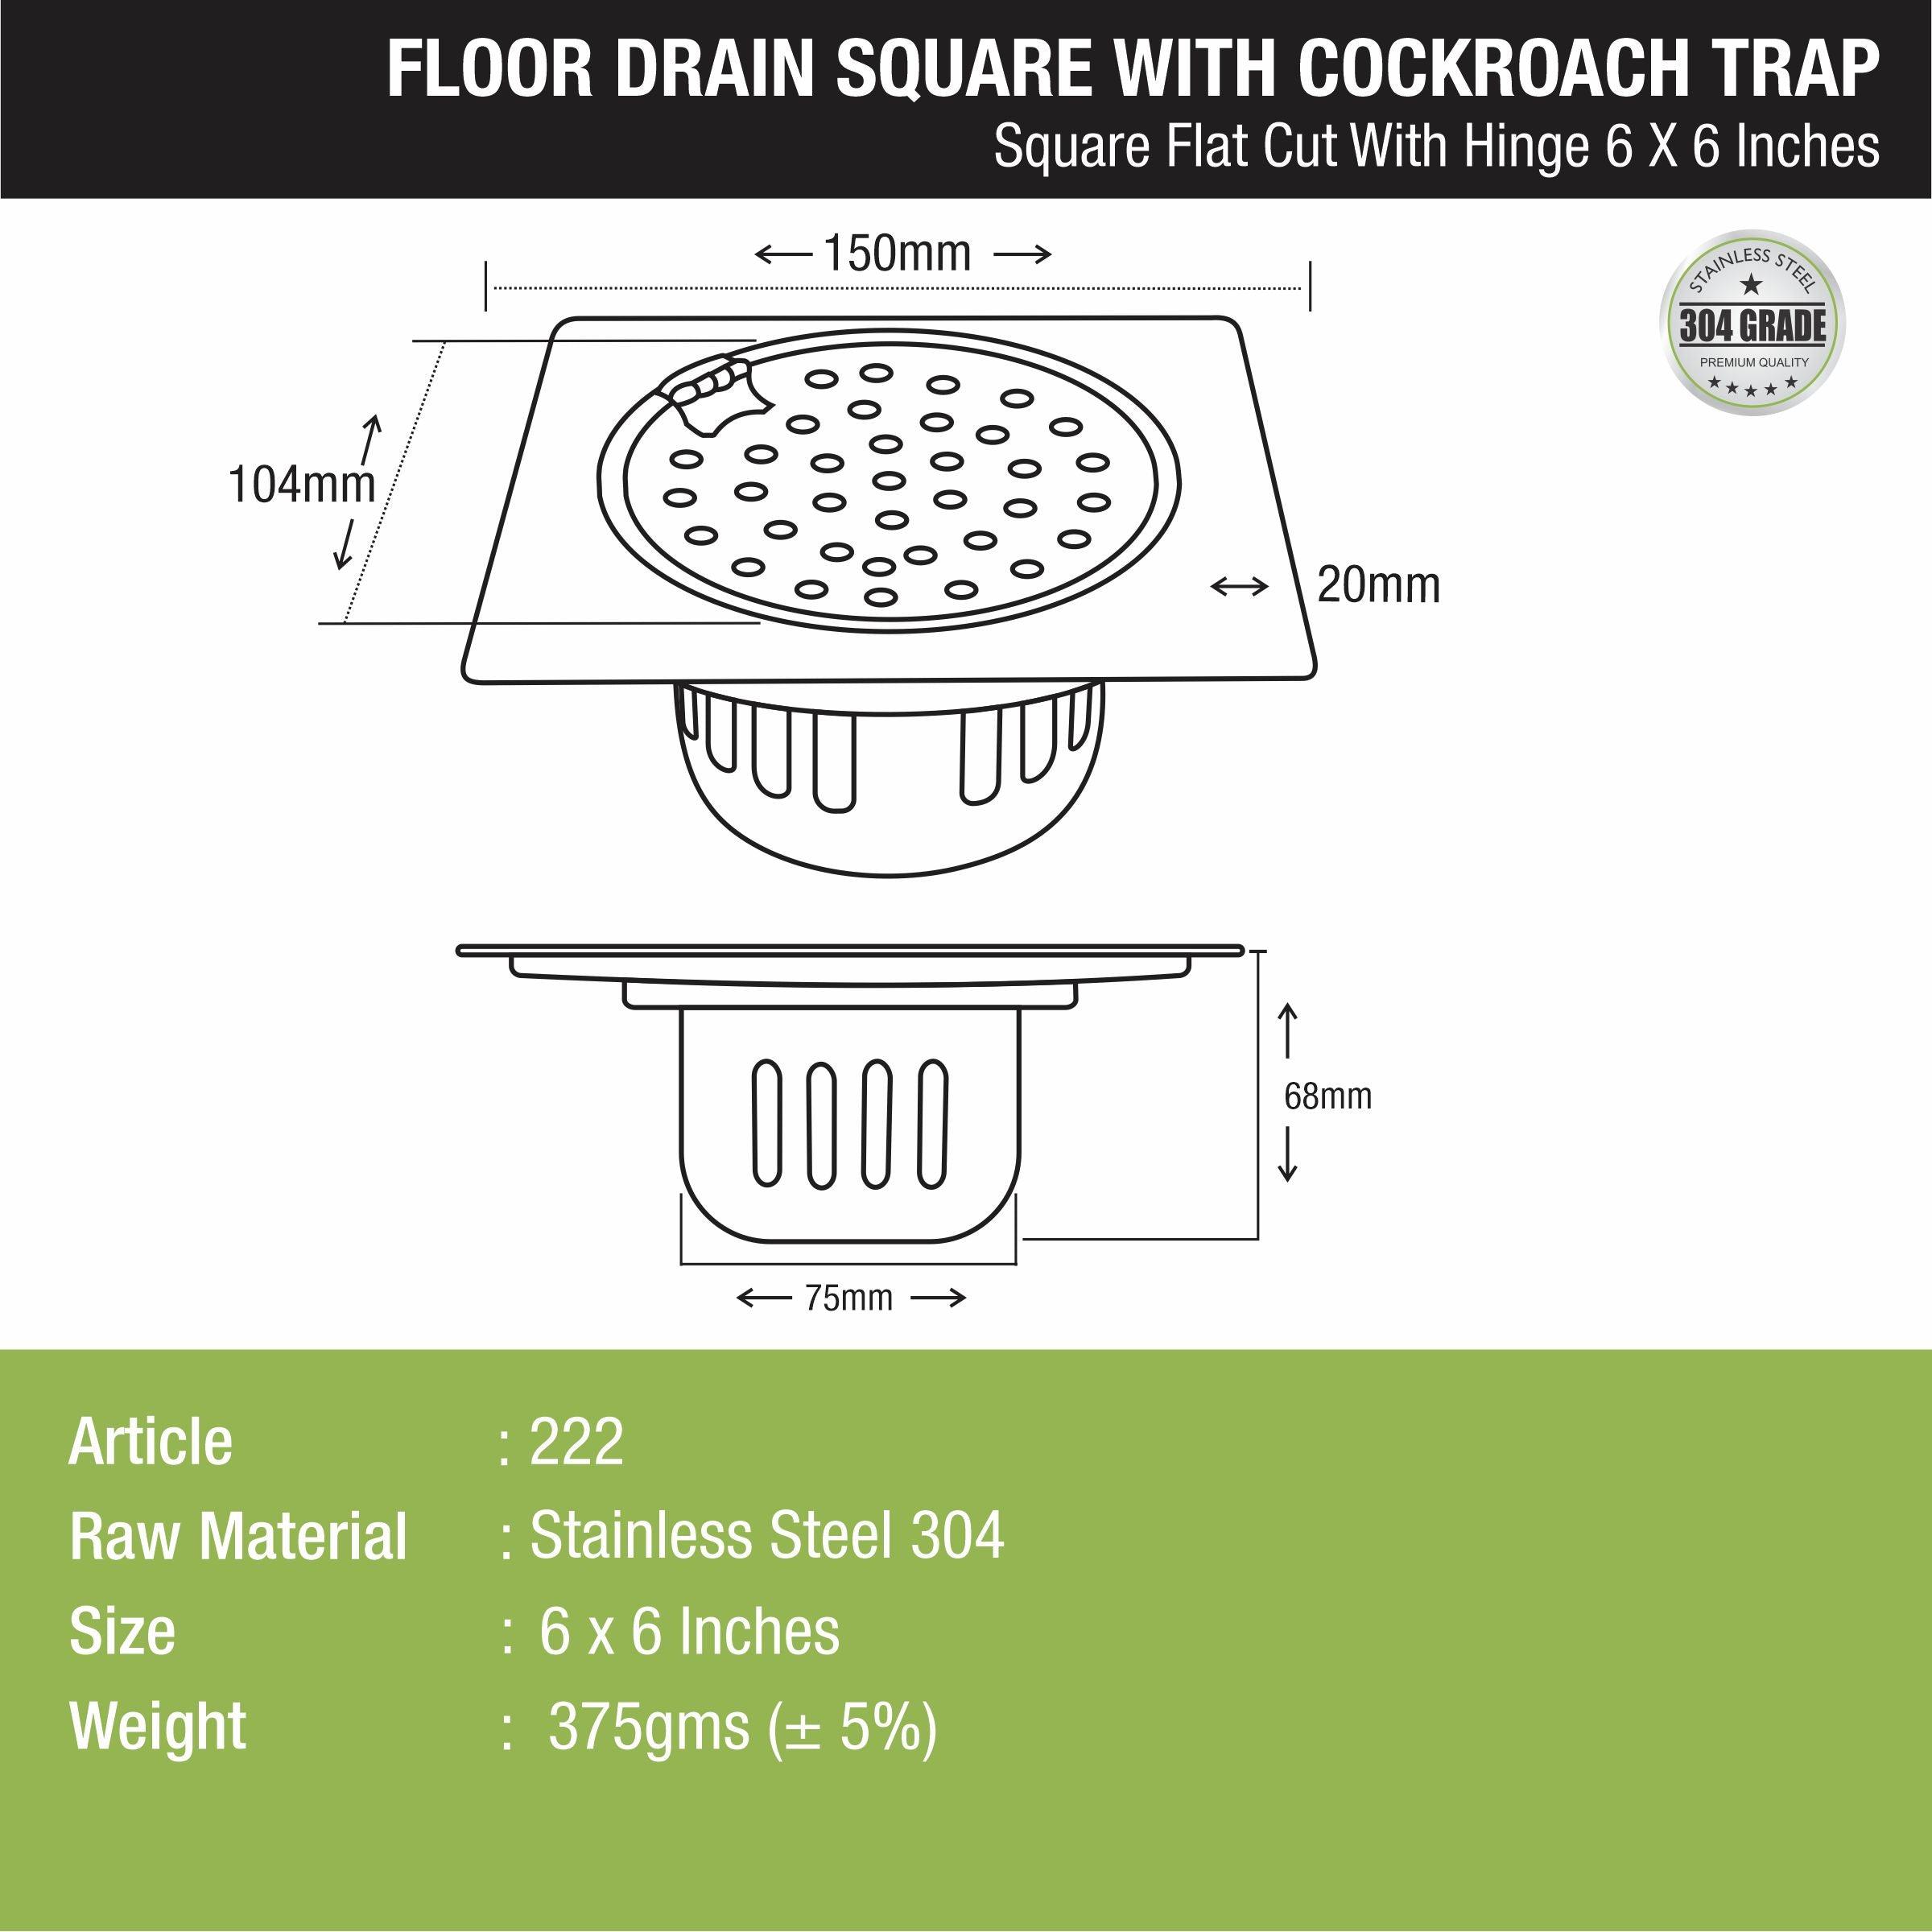 Square Flat Cut Floor Drain (6 x 6 Inches) with Hinge and Cockroach Trap - LIPKA